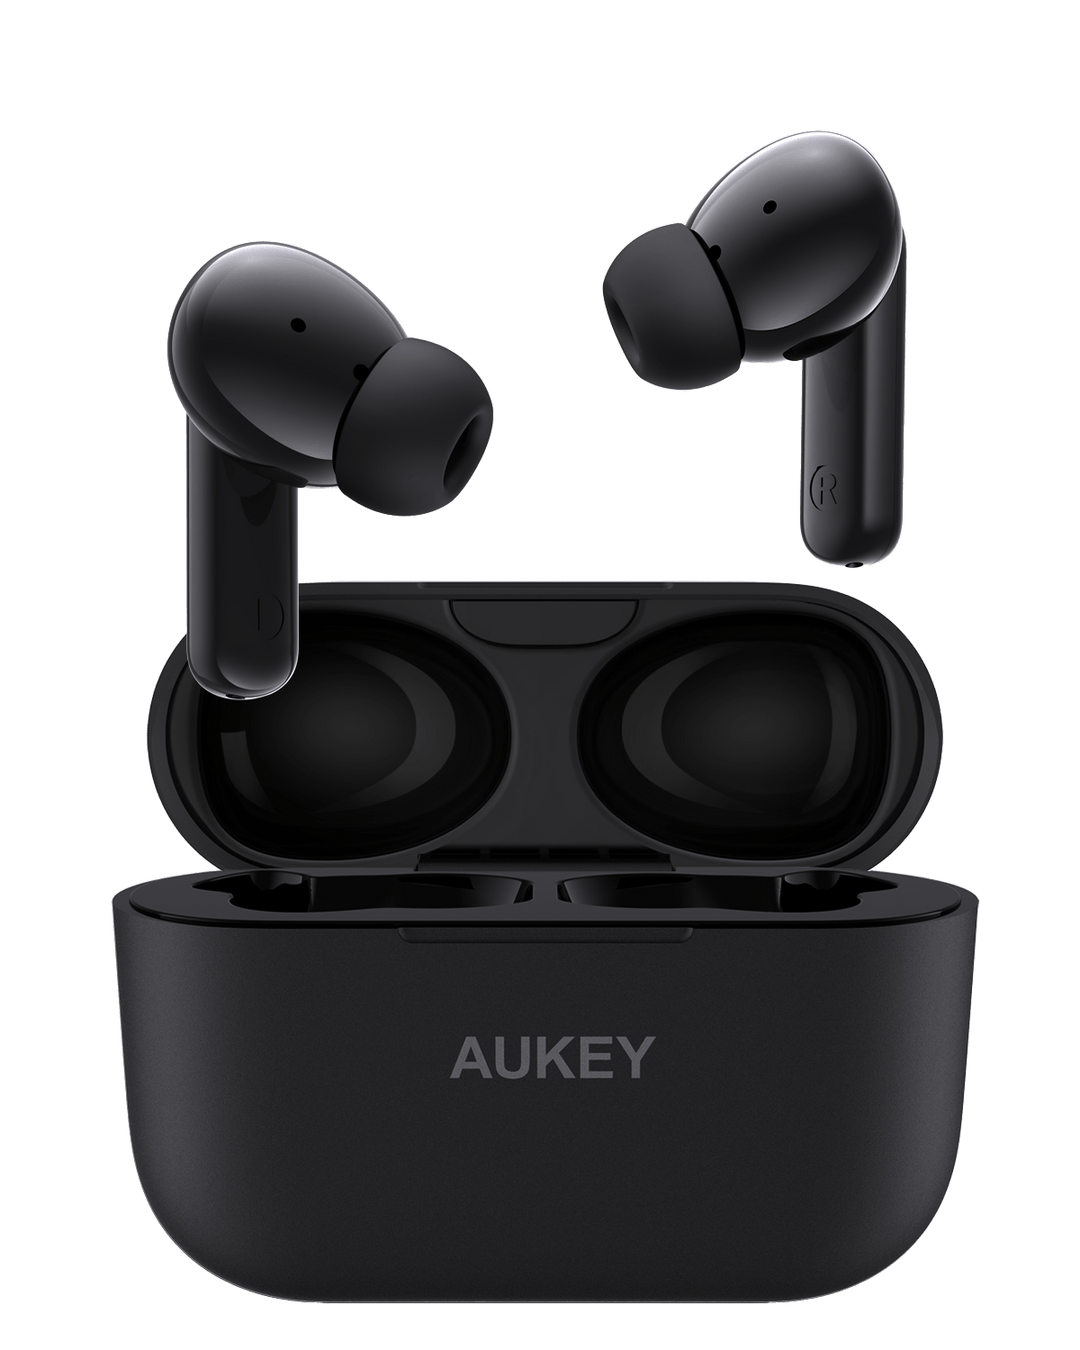 Aukey noise cancelling earbuds in black.